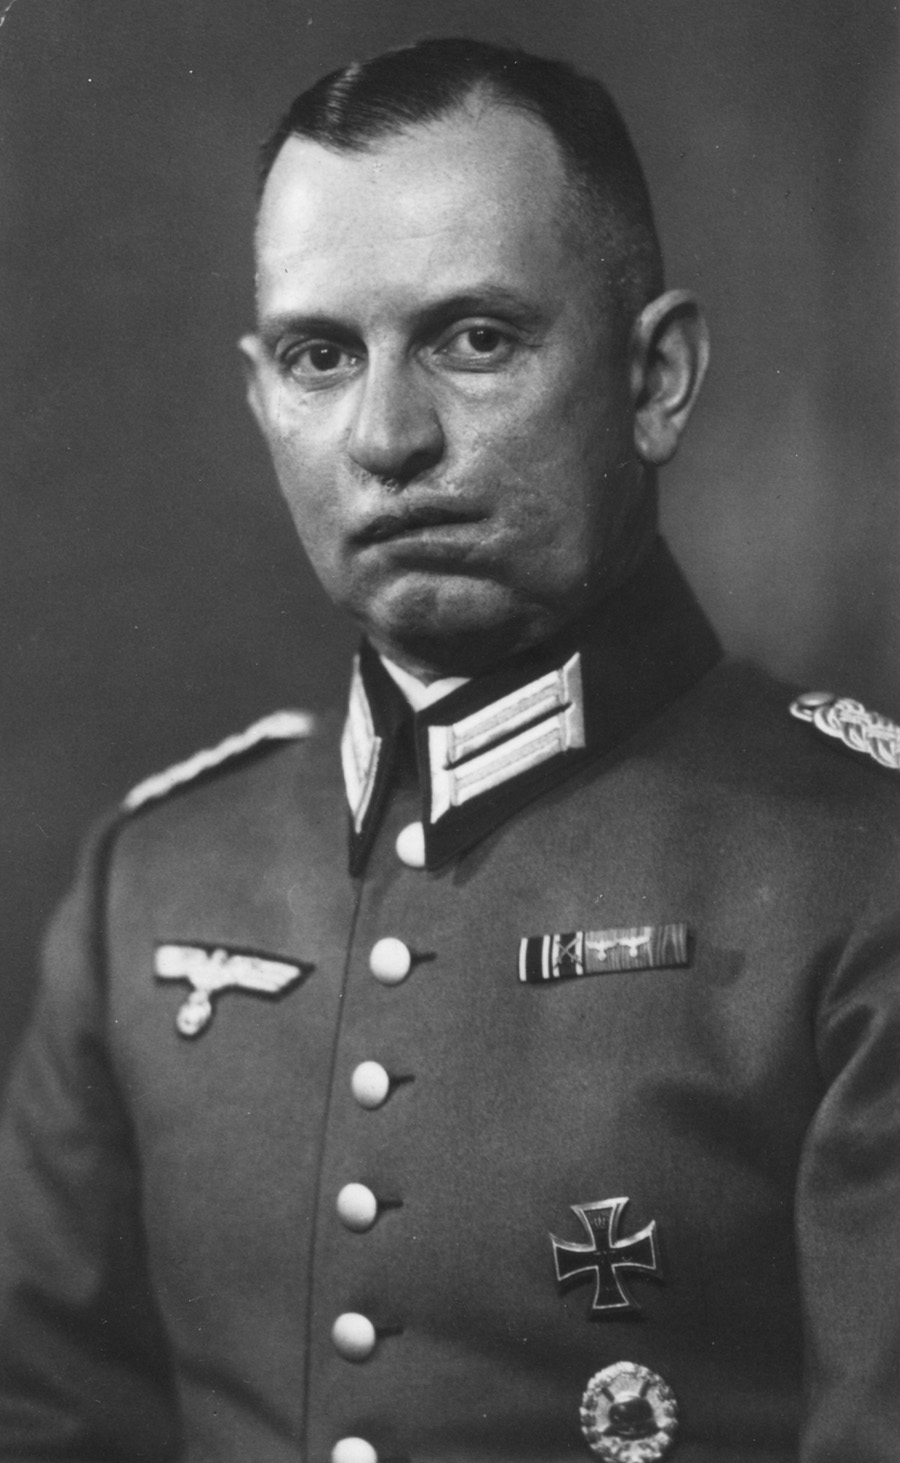 Colonel Ernst Bloch was a German Mischling (half-Jew) who gave much for the Fatherland. His facial scars were the result of being bayonetted during World War I. He died defending Berlin in 1945. 